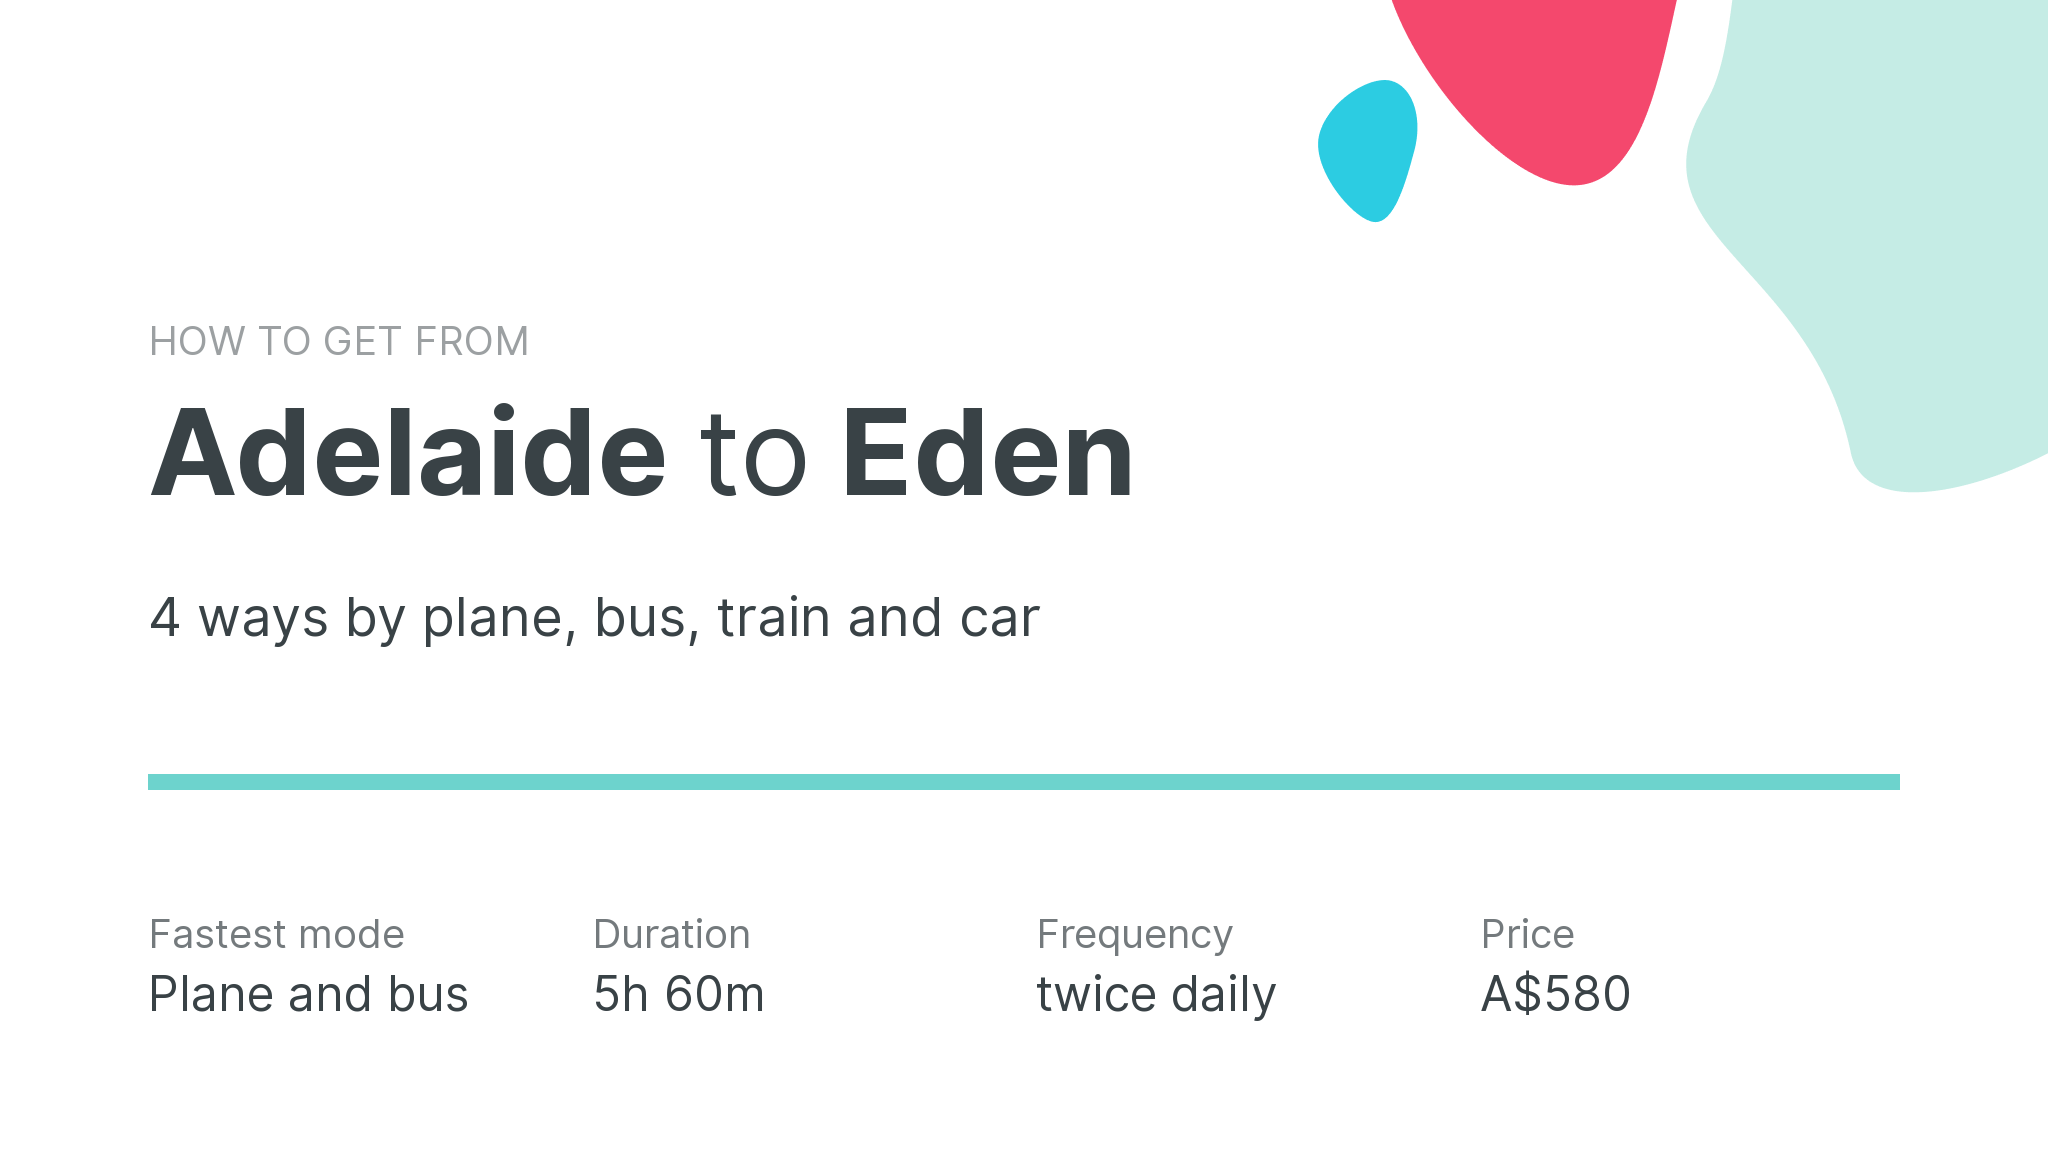 How do I get from Adelaide to Eden